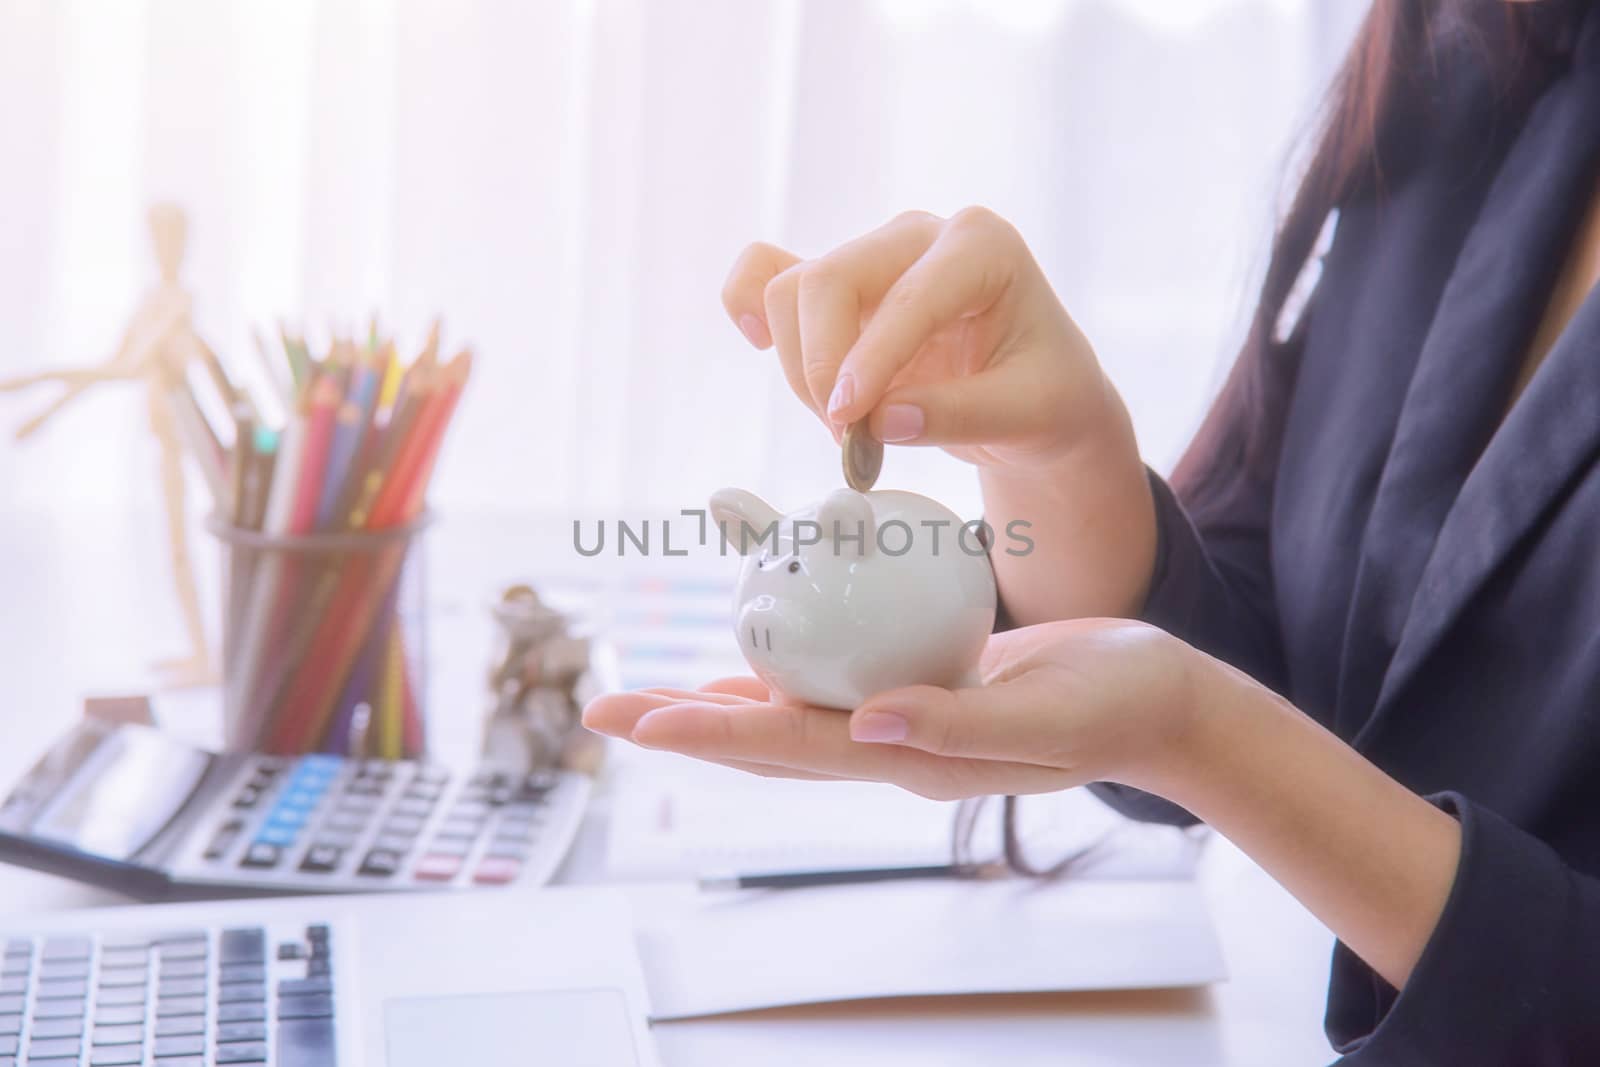 Coins on hand are dropped Piggy bank on wooden top table, money savings concept 